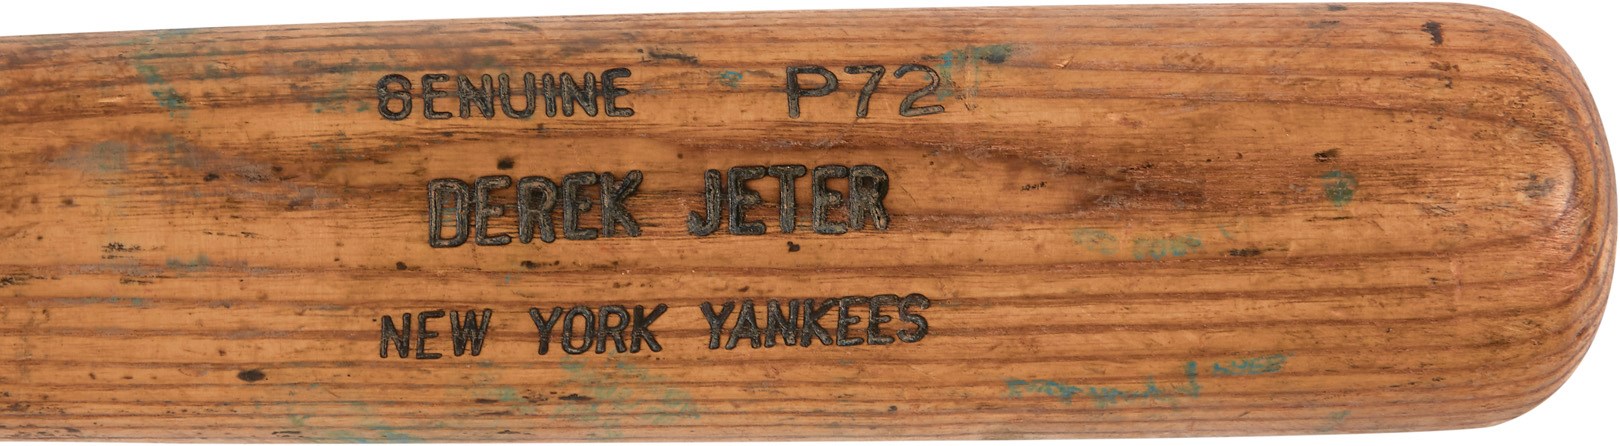 NY Yankees, Giants & Mets - Derek Jeter Game Used Bat From His Very First Professional Order (PSA 8.5)